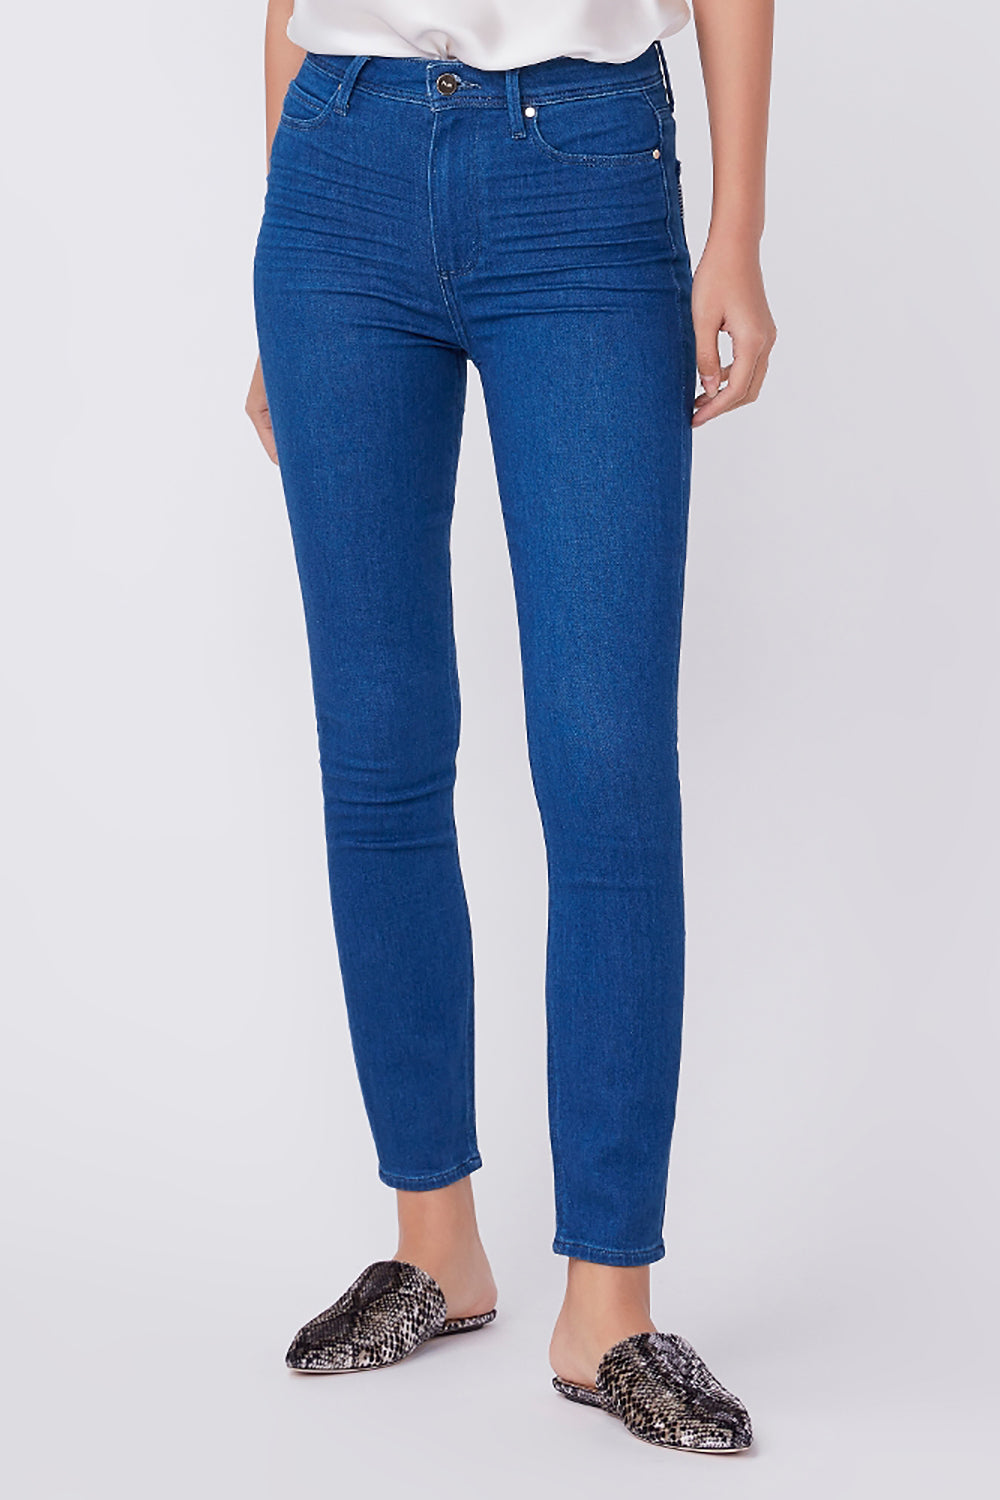 Paige Margot Skinny - Gallery | Buy Paige Jeans online NZ Free Shipping